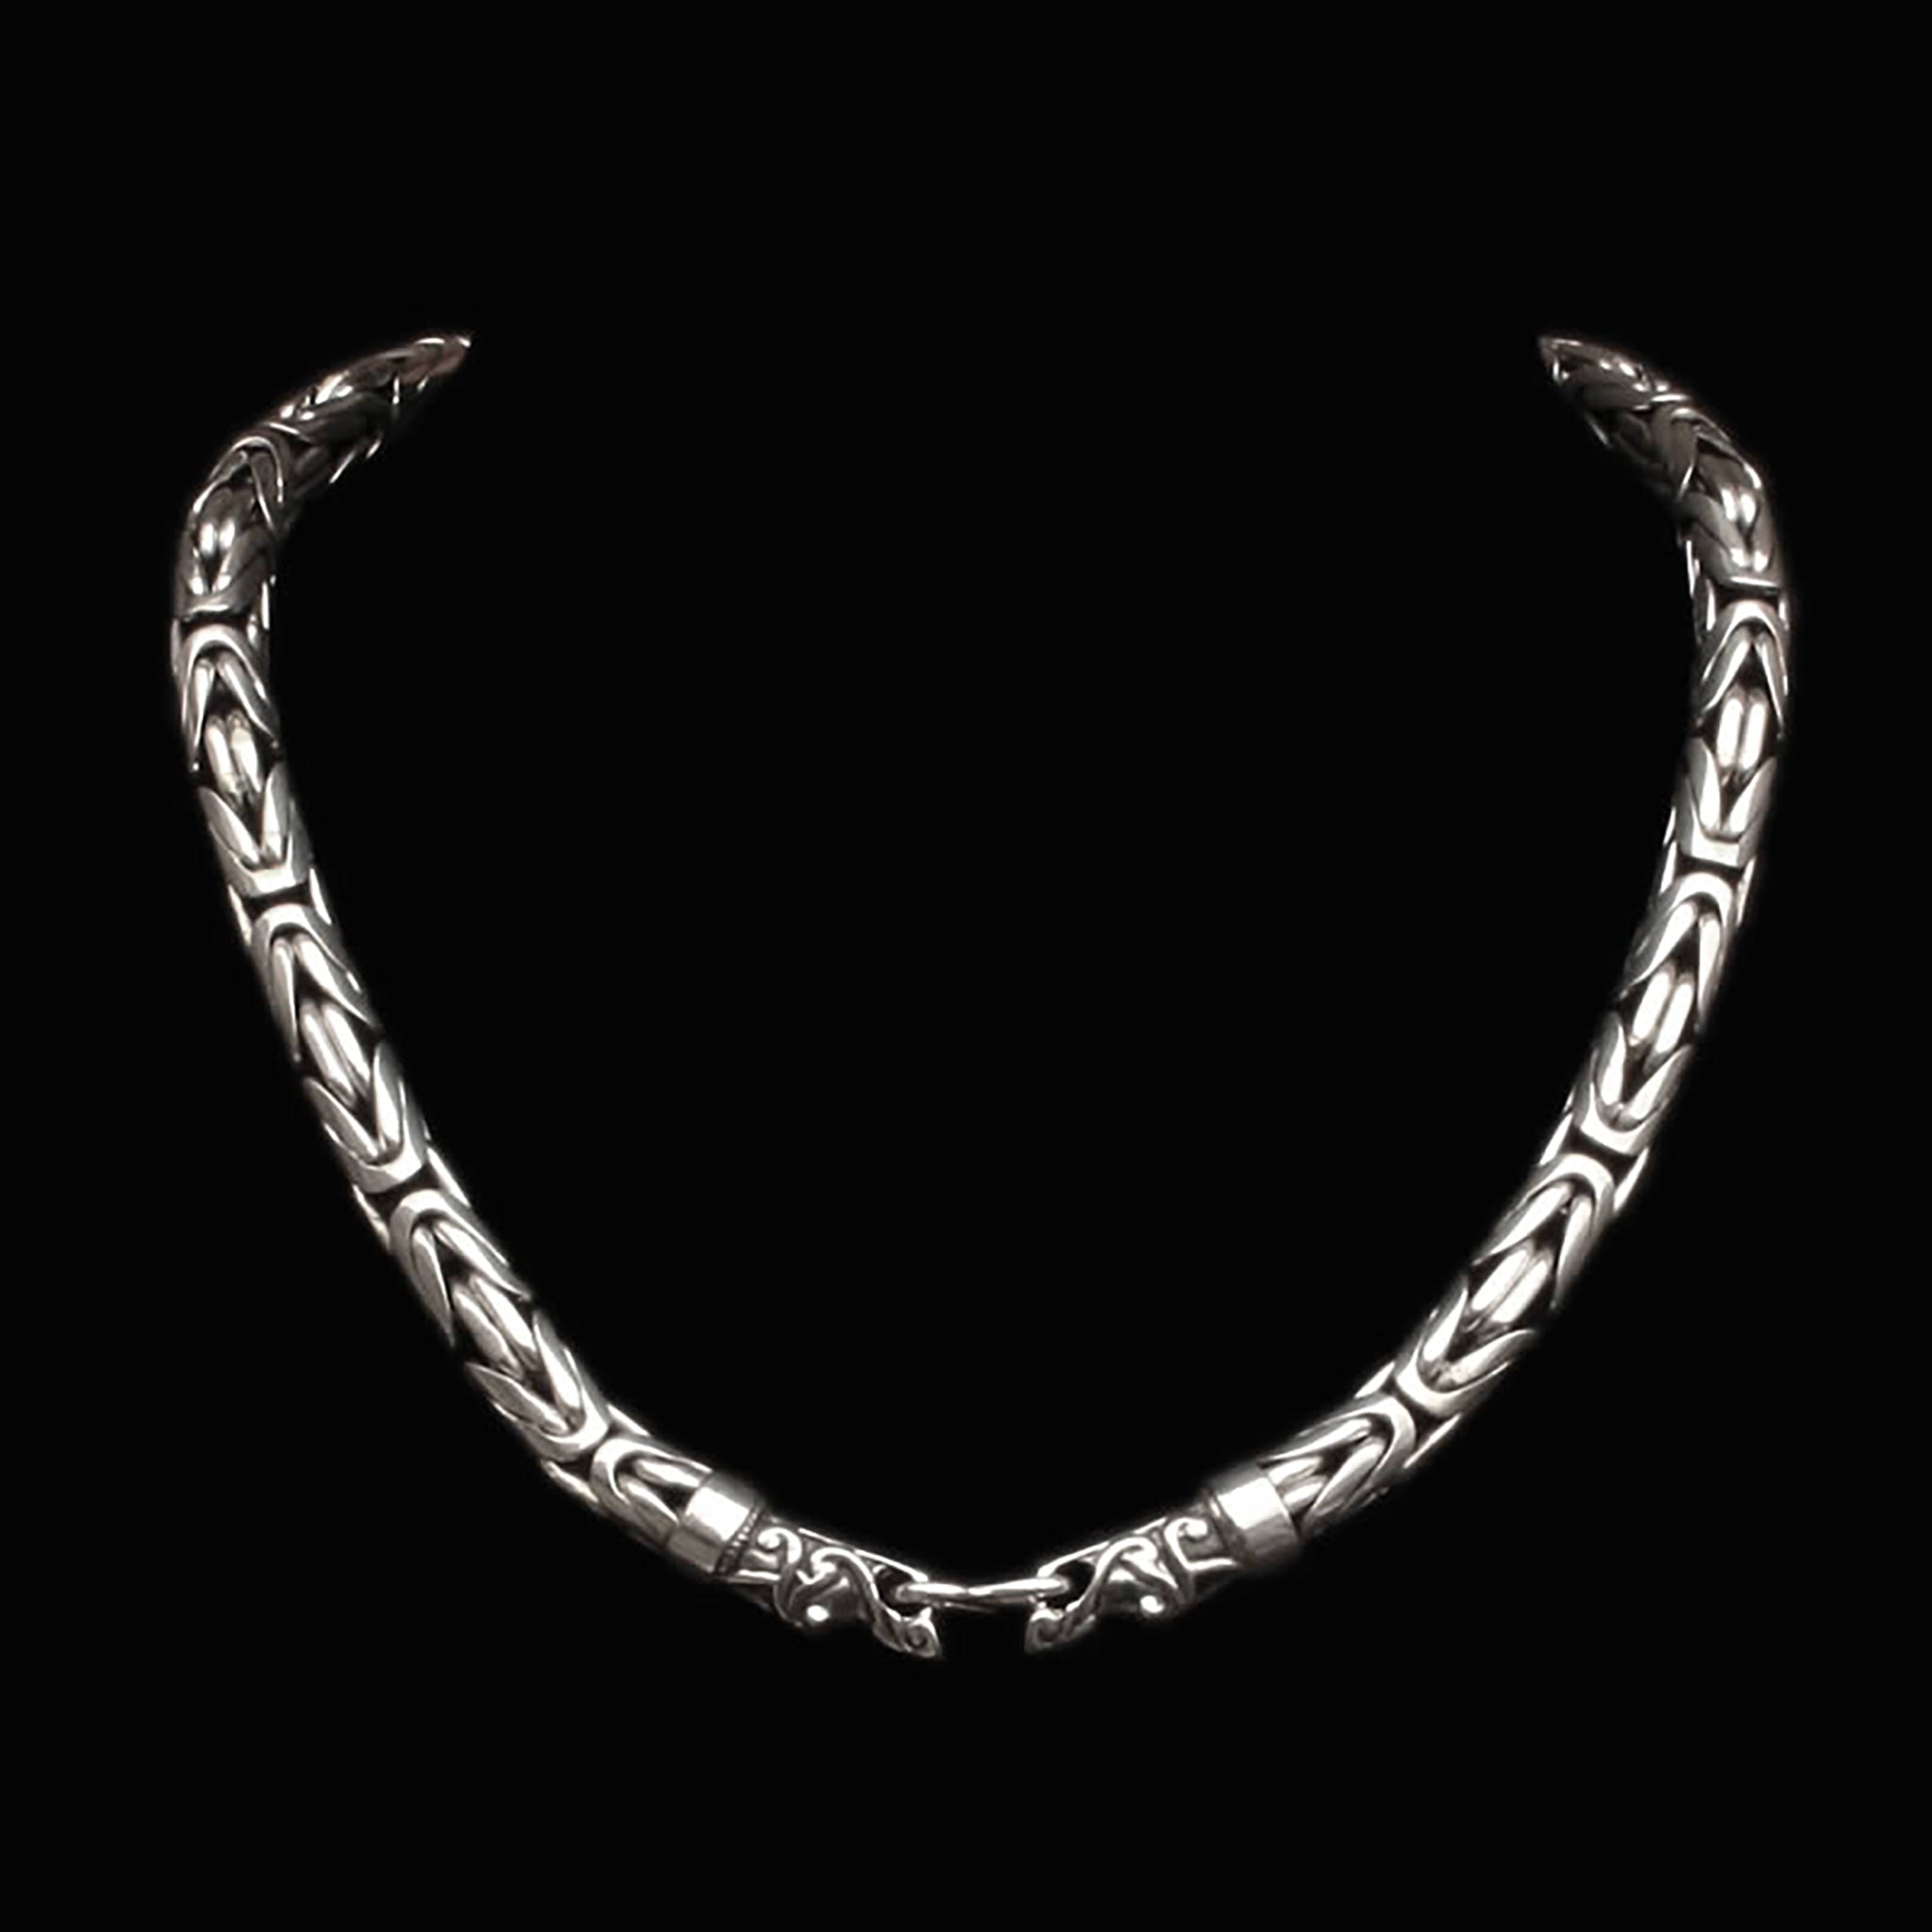 10mm Silver King Chain Necklace with Gotland Dragon Heads with S-Clasp